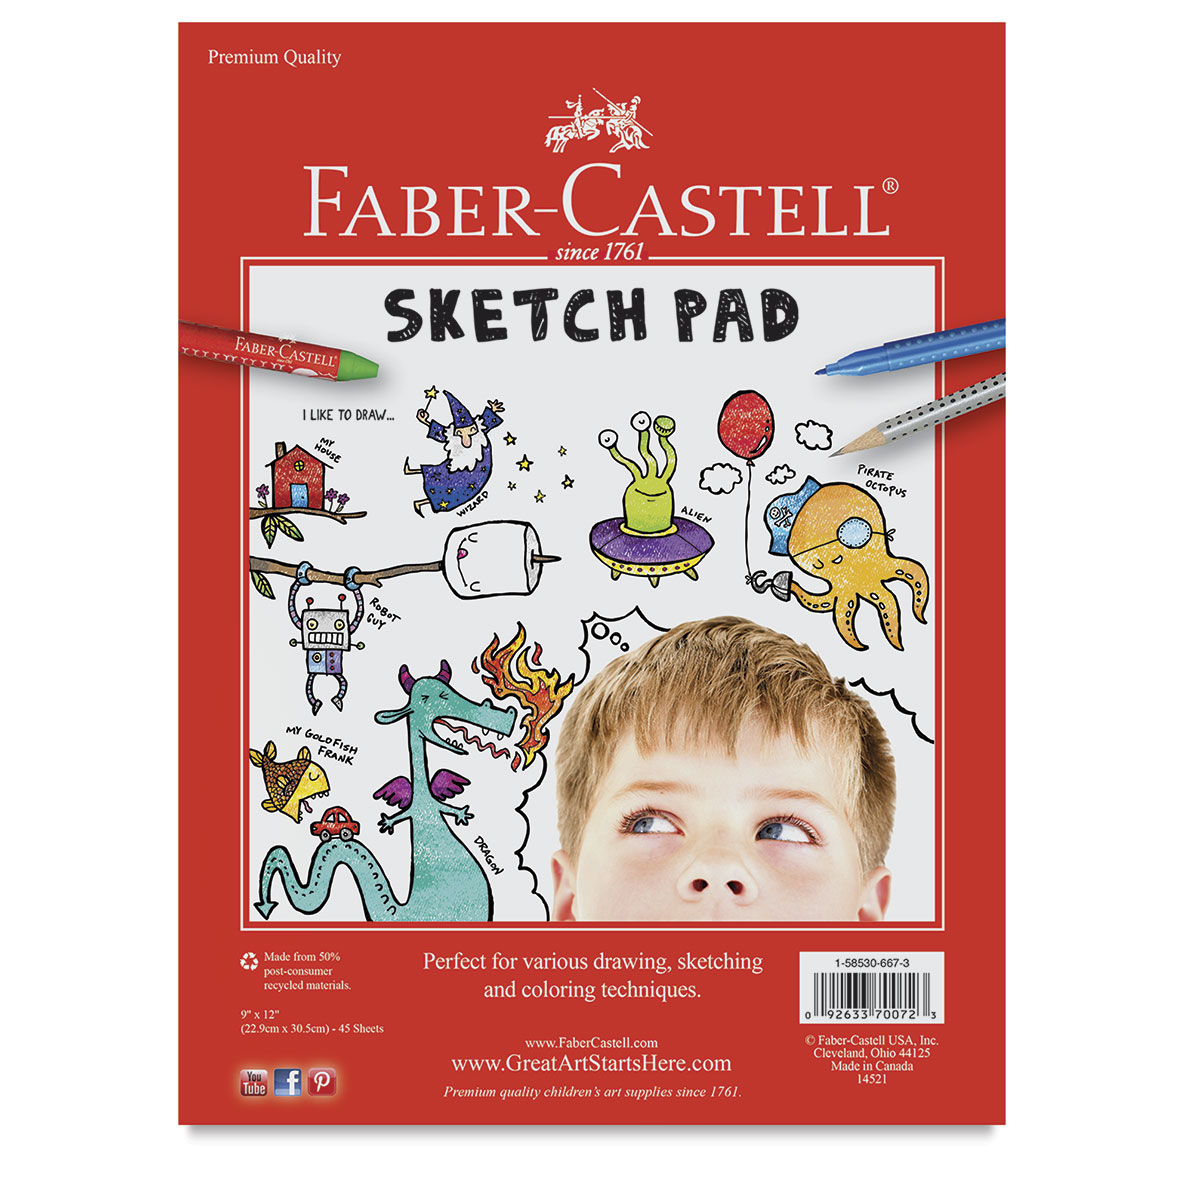 Buy Online FABER-CASTELL Drawing Book 21 x 29.5 CM in Dubai | Available  FABER-CASTELL Drawing Book 21 x 29.5 CM at Best Price